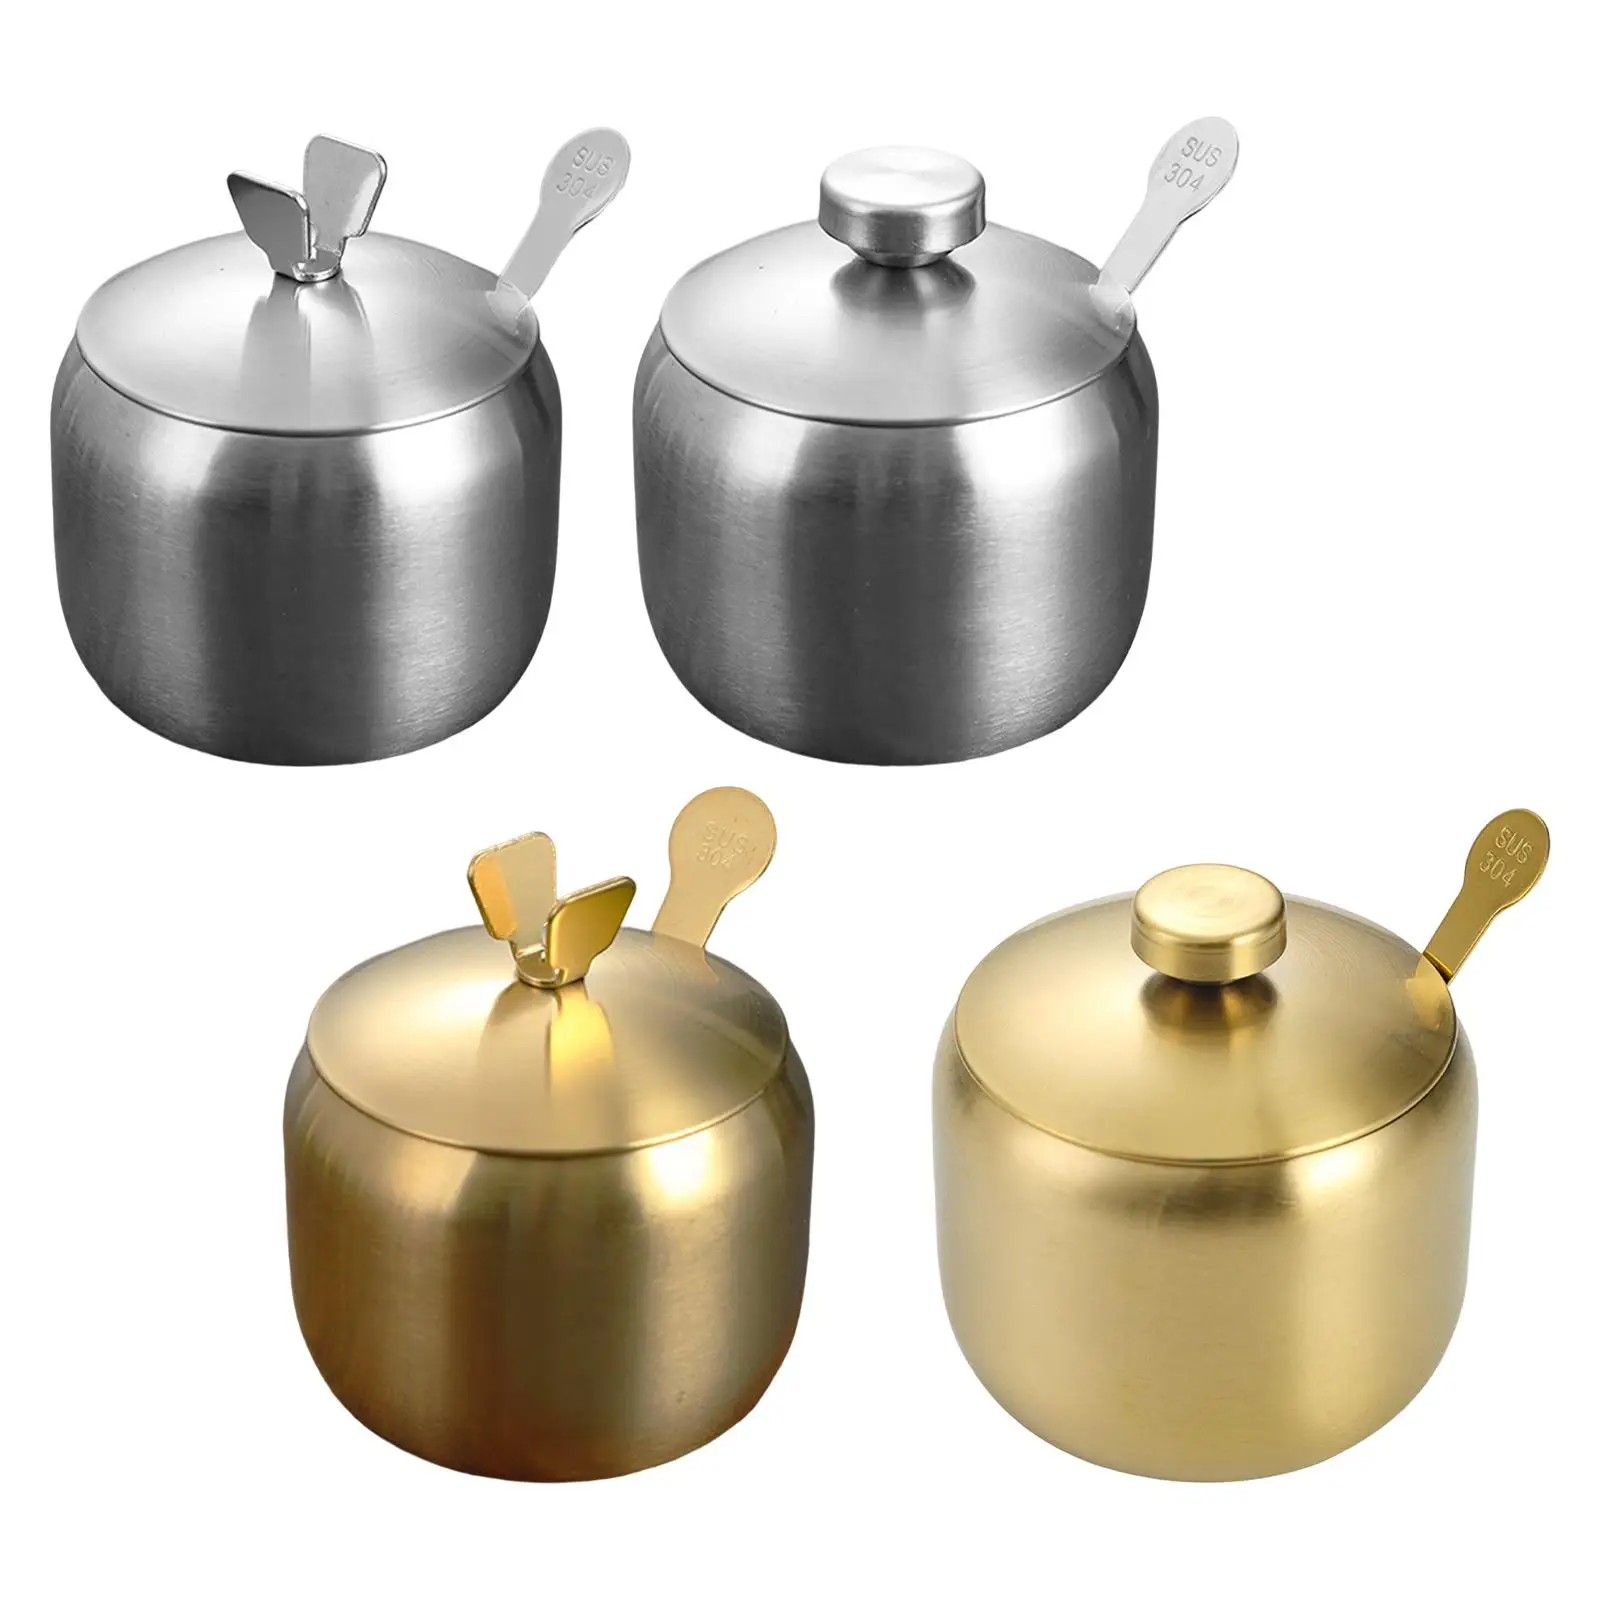 Stainless Steel Seasoning Box Kitchen Supplies Condiment Jar Spice Pots Kitchen Cruet with Lid and Spoon for Salt